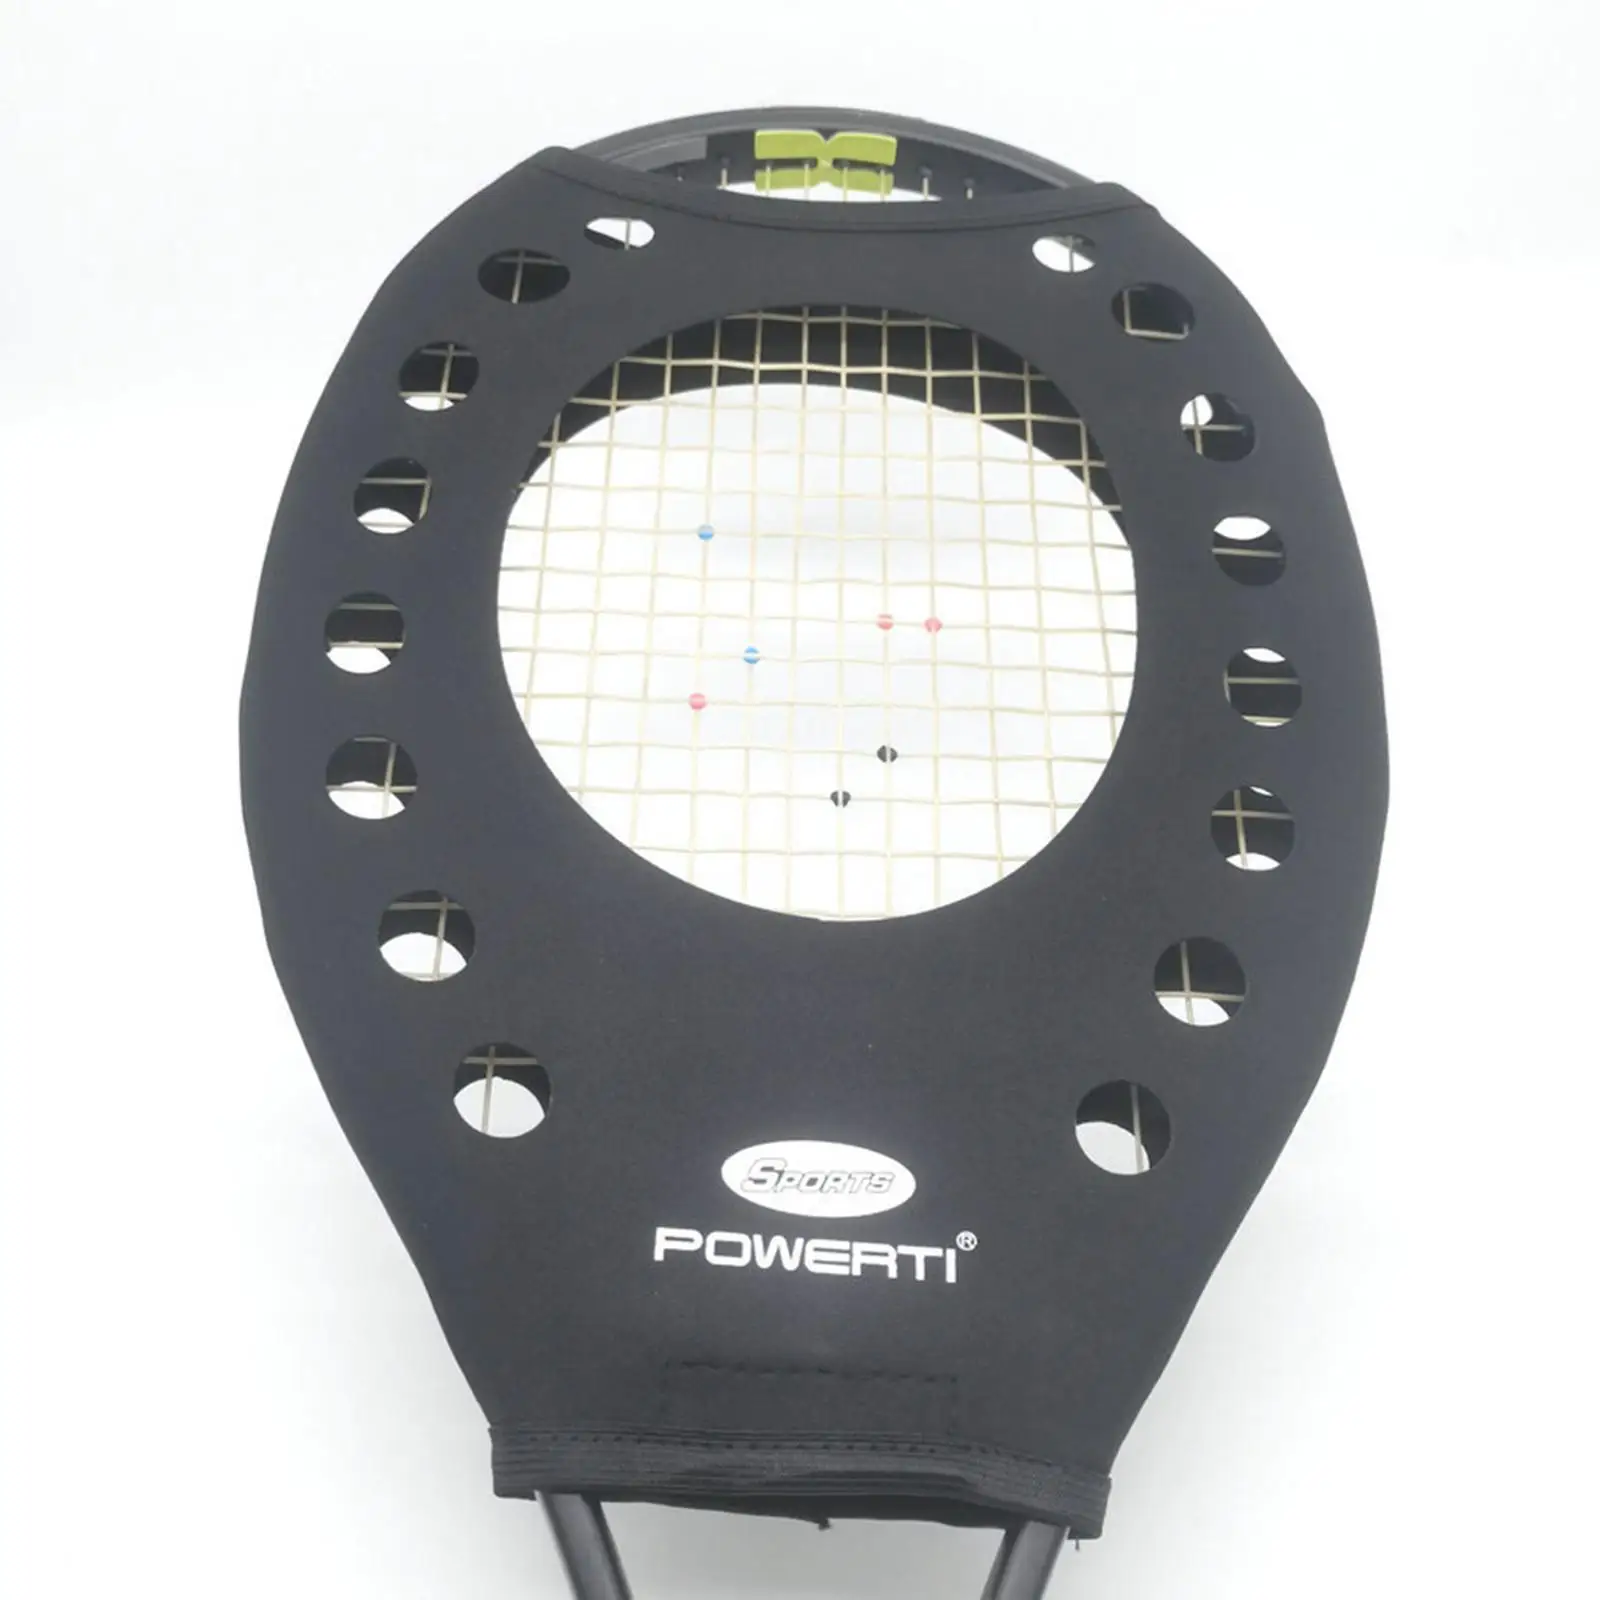 Tennis Racket Sweet Spot Trainer Learn to Hit The Center Protection Cover for Practice